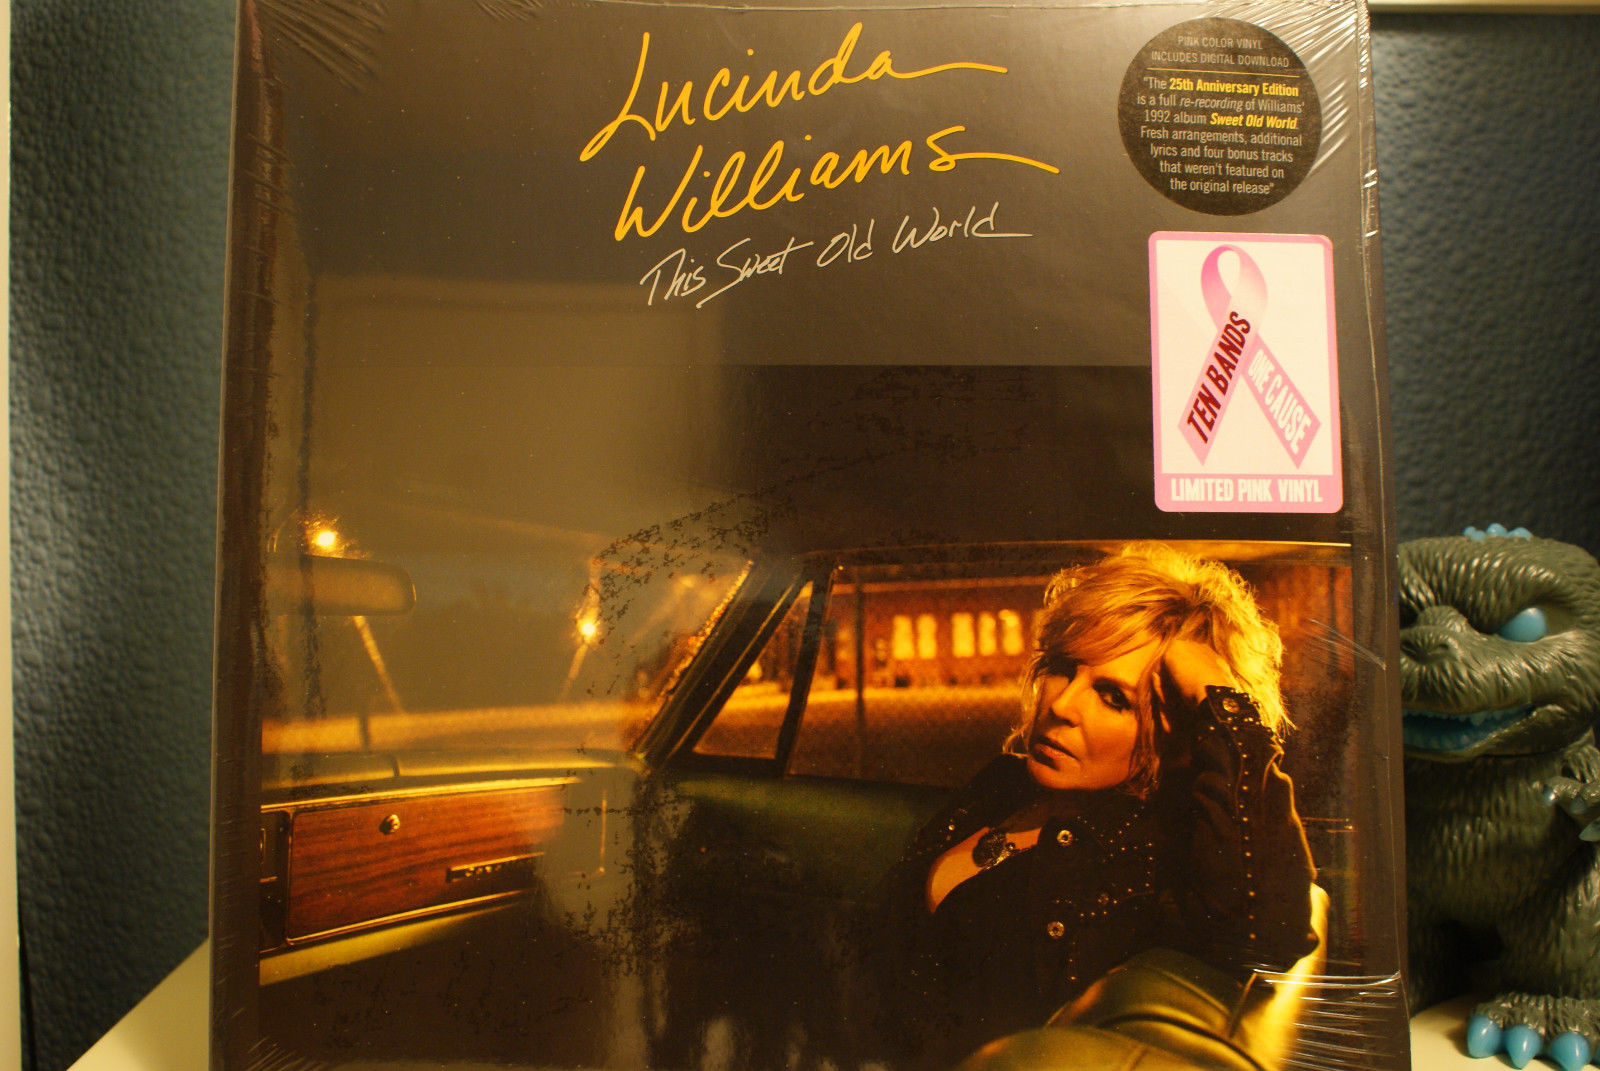 popsike.com - Lucinda Williams - This Sweet Old World 2x limited pink  colored vinyl lp - auction details